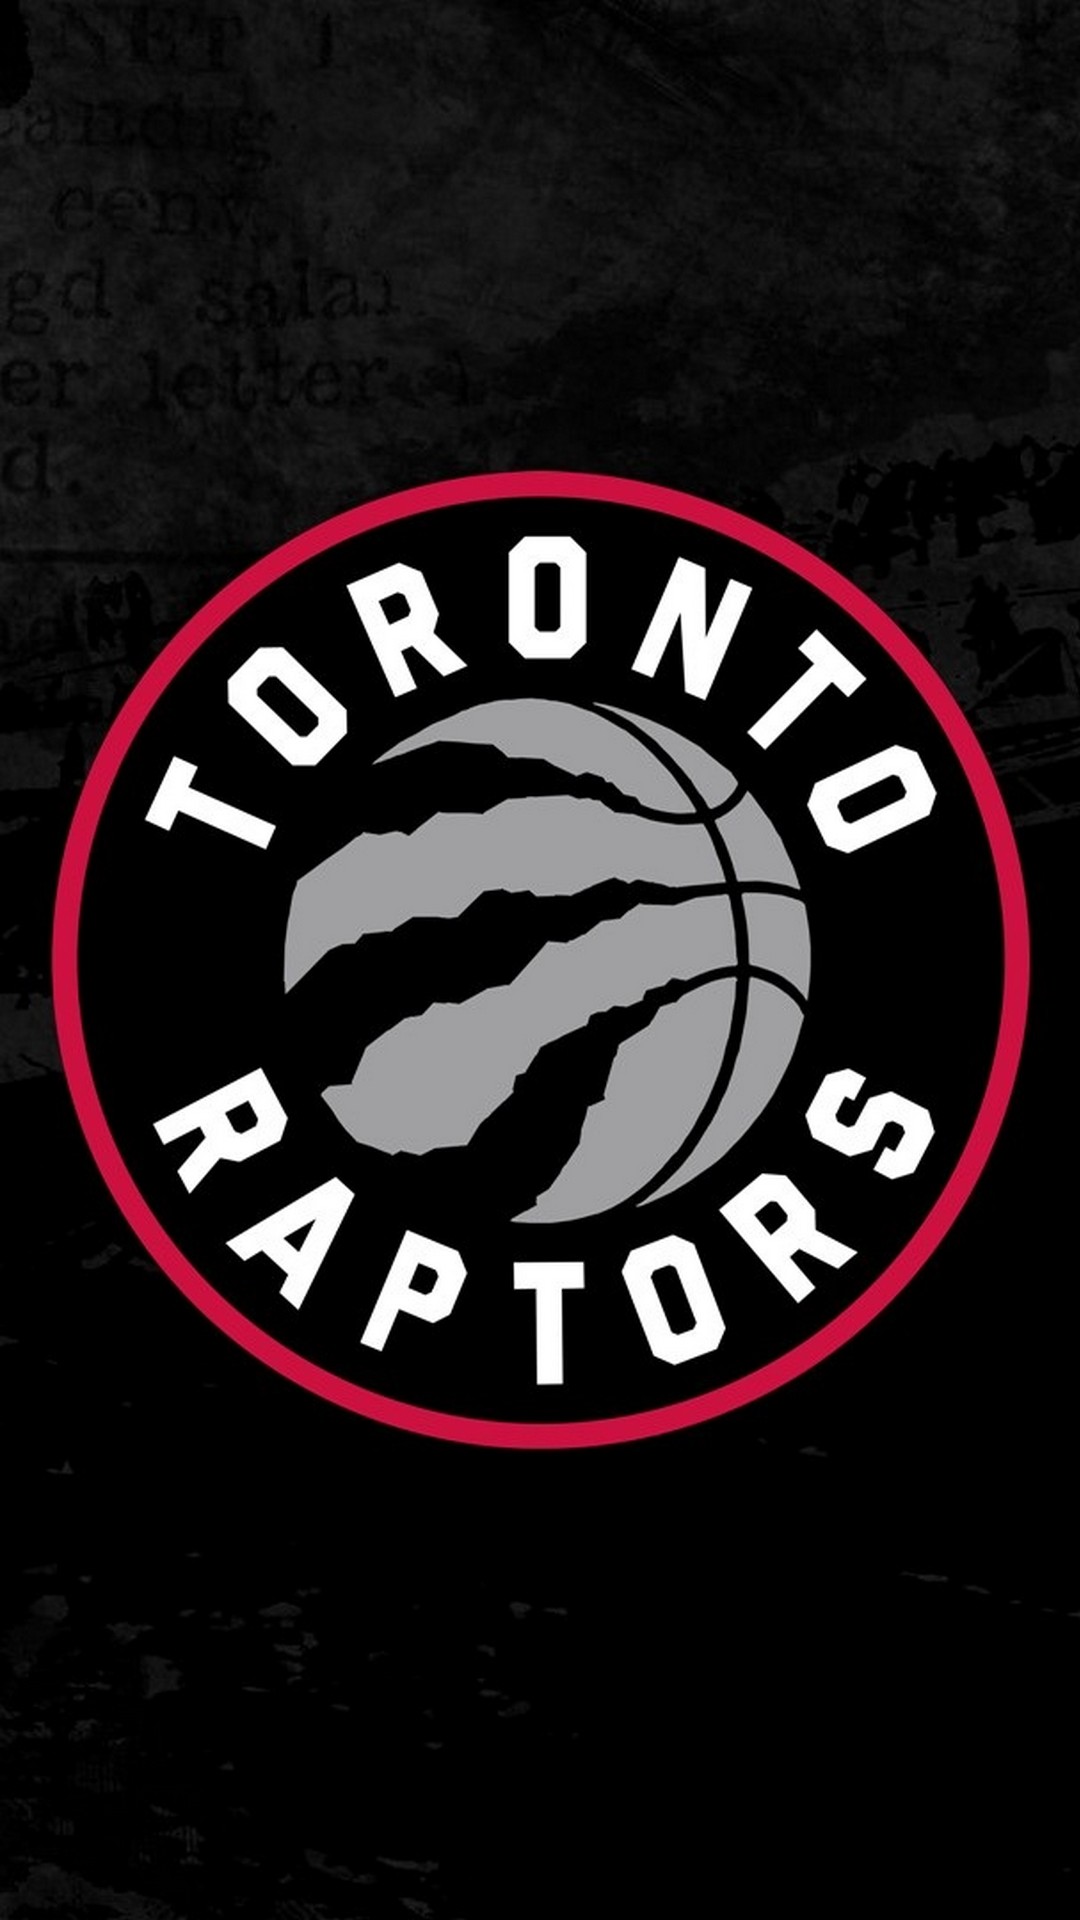 Toronto Raptors HD Wallpapers For Android with image resolution 1080x1920 pixel. You can make this wallpaper for your Android backgrounds, Tablet, Smartphones Screensavers and Mobile Phone Lock Screen